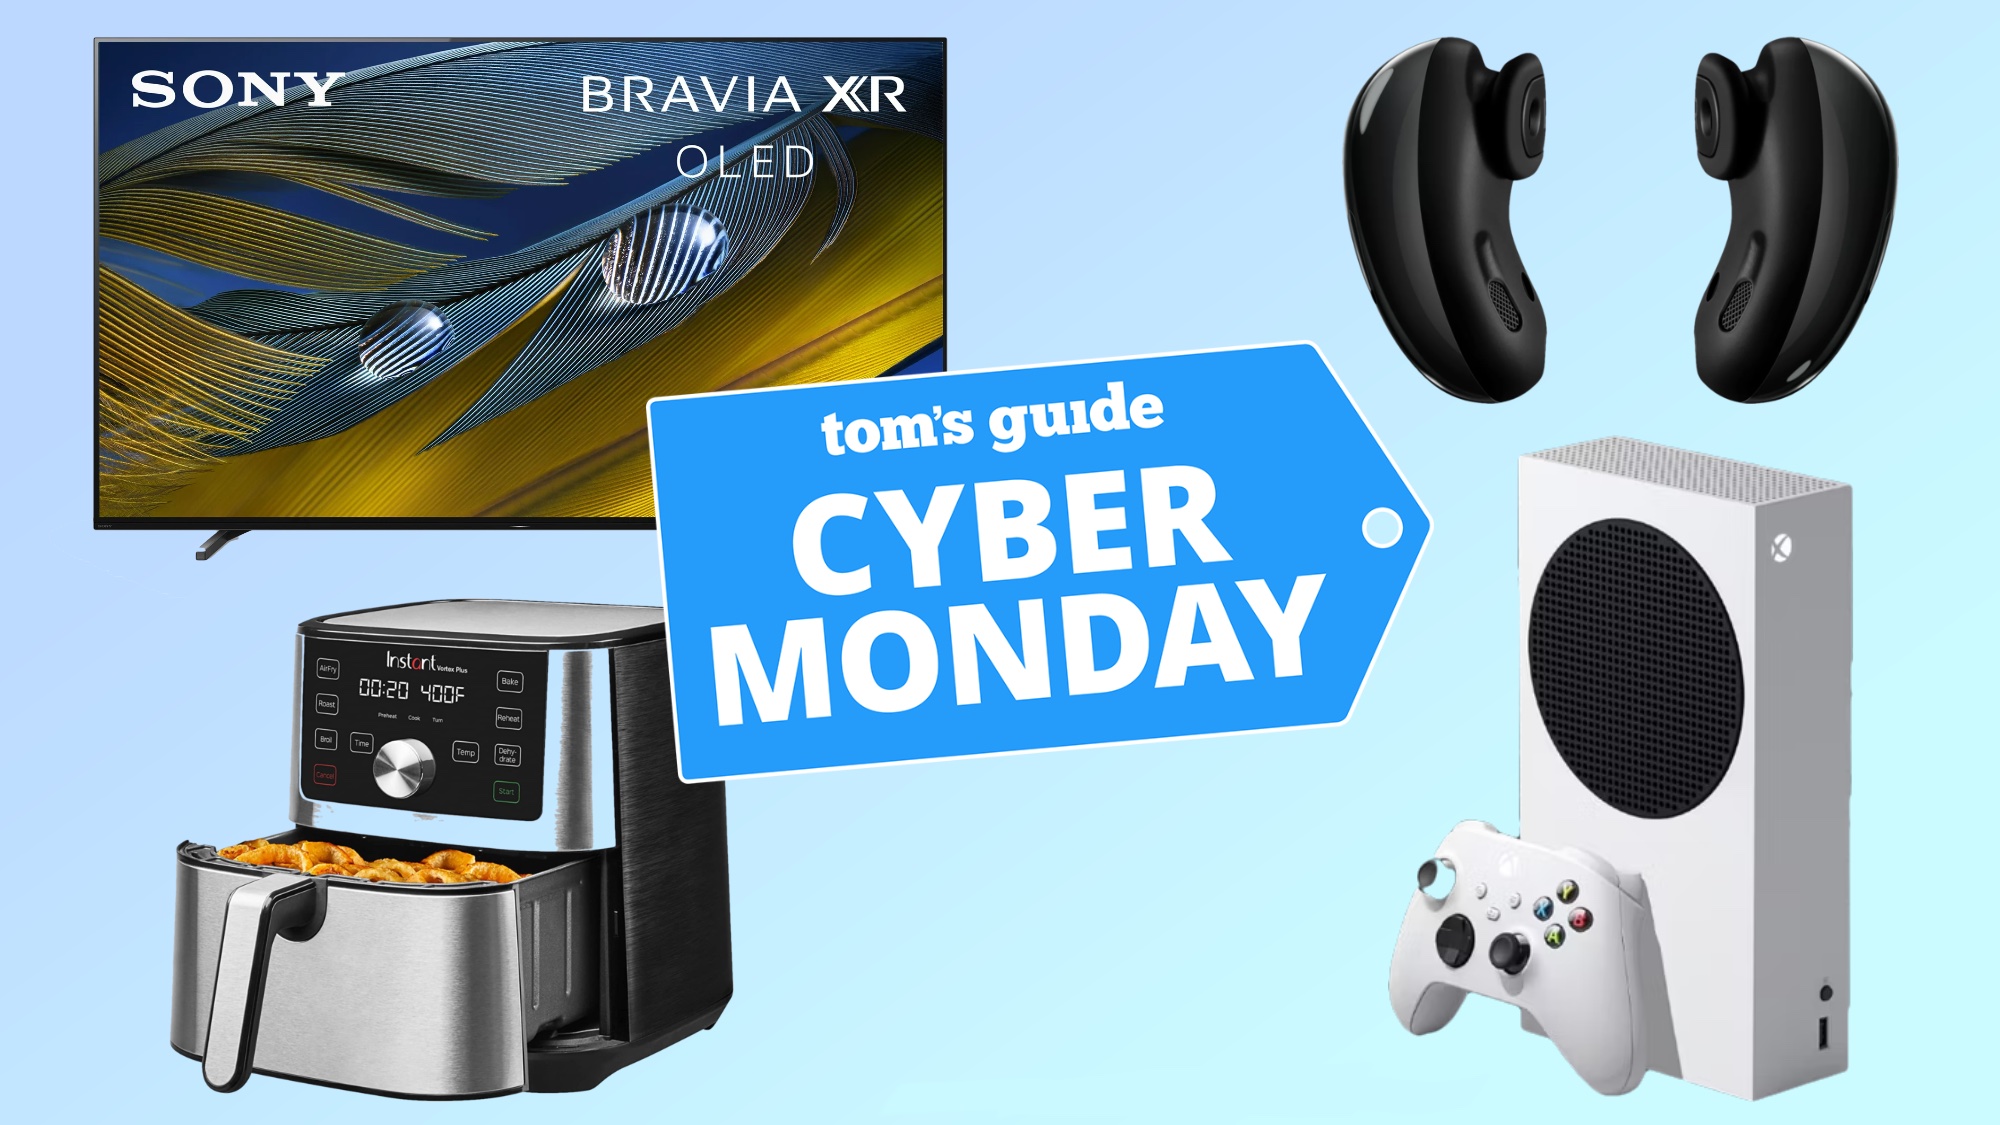 Sony OLED TV, Samsung Galaxy Buds Live, Instant Vortex Air Fryer and Xbox Series S with Cyber Monday deal tag